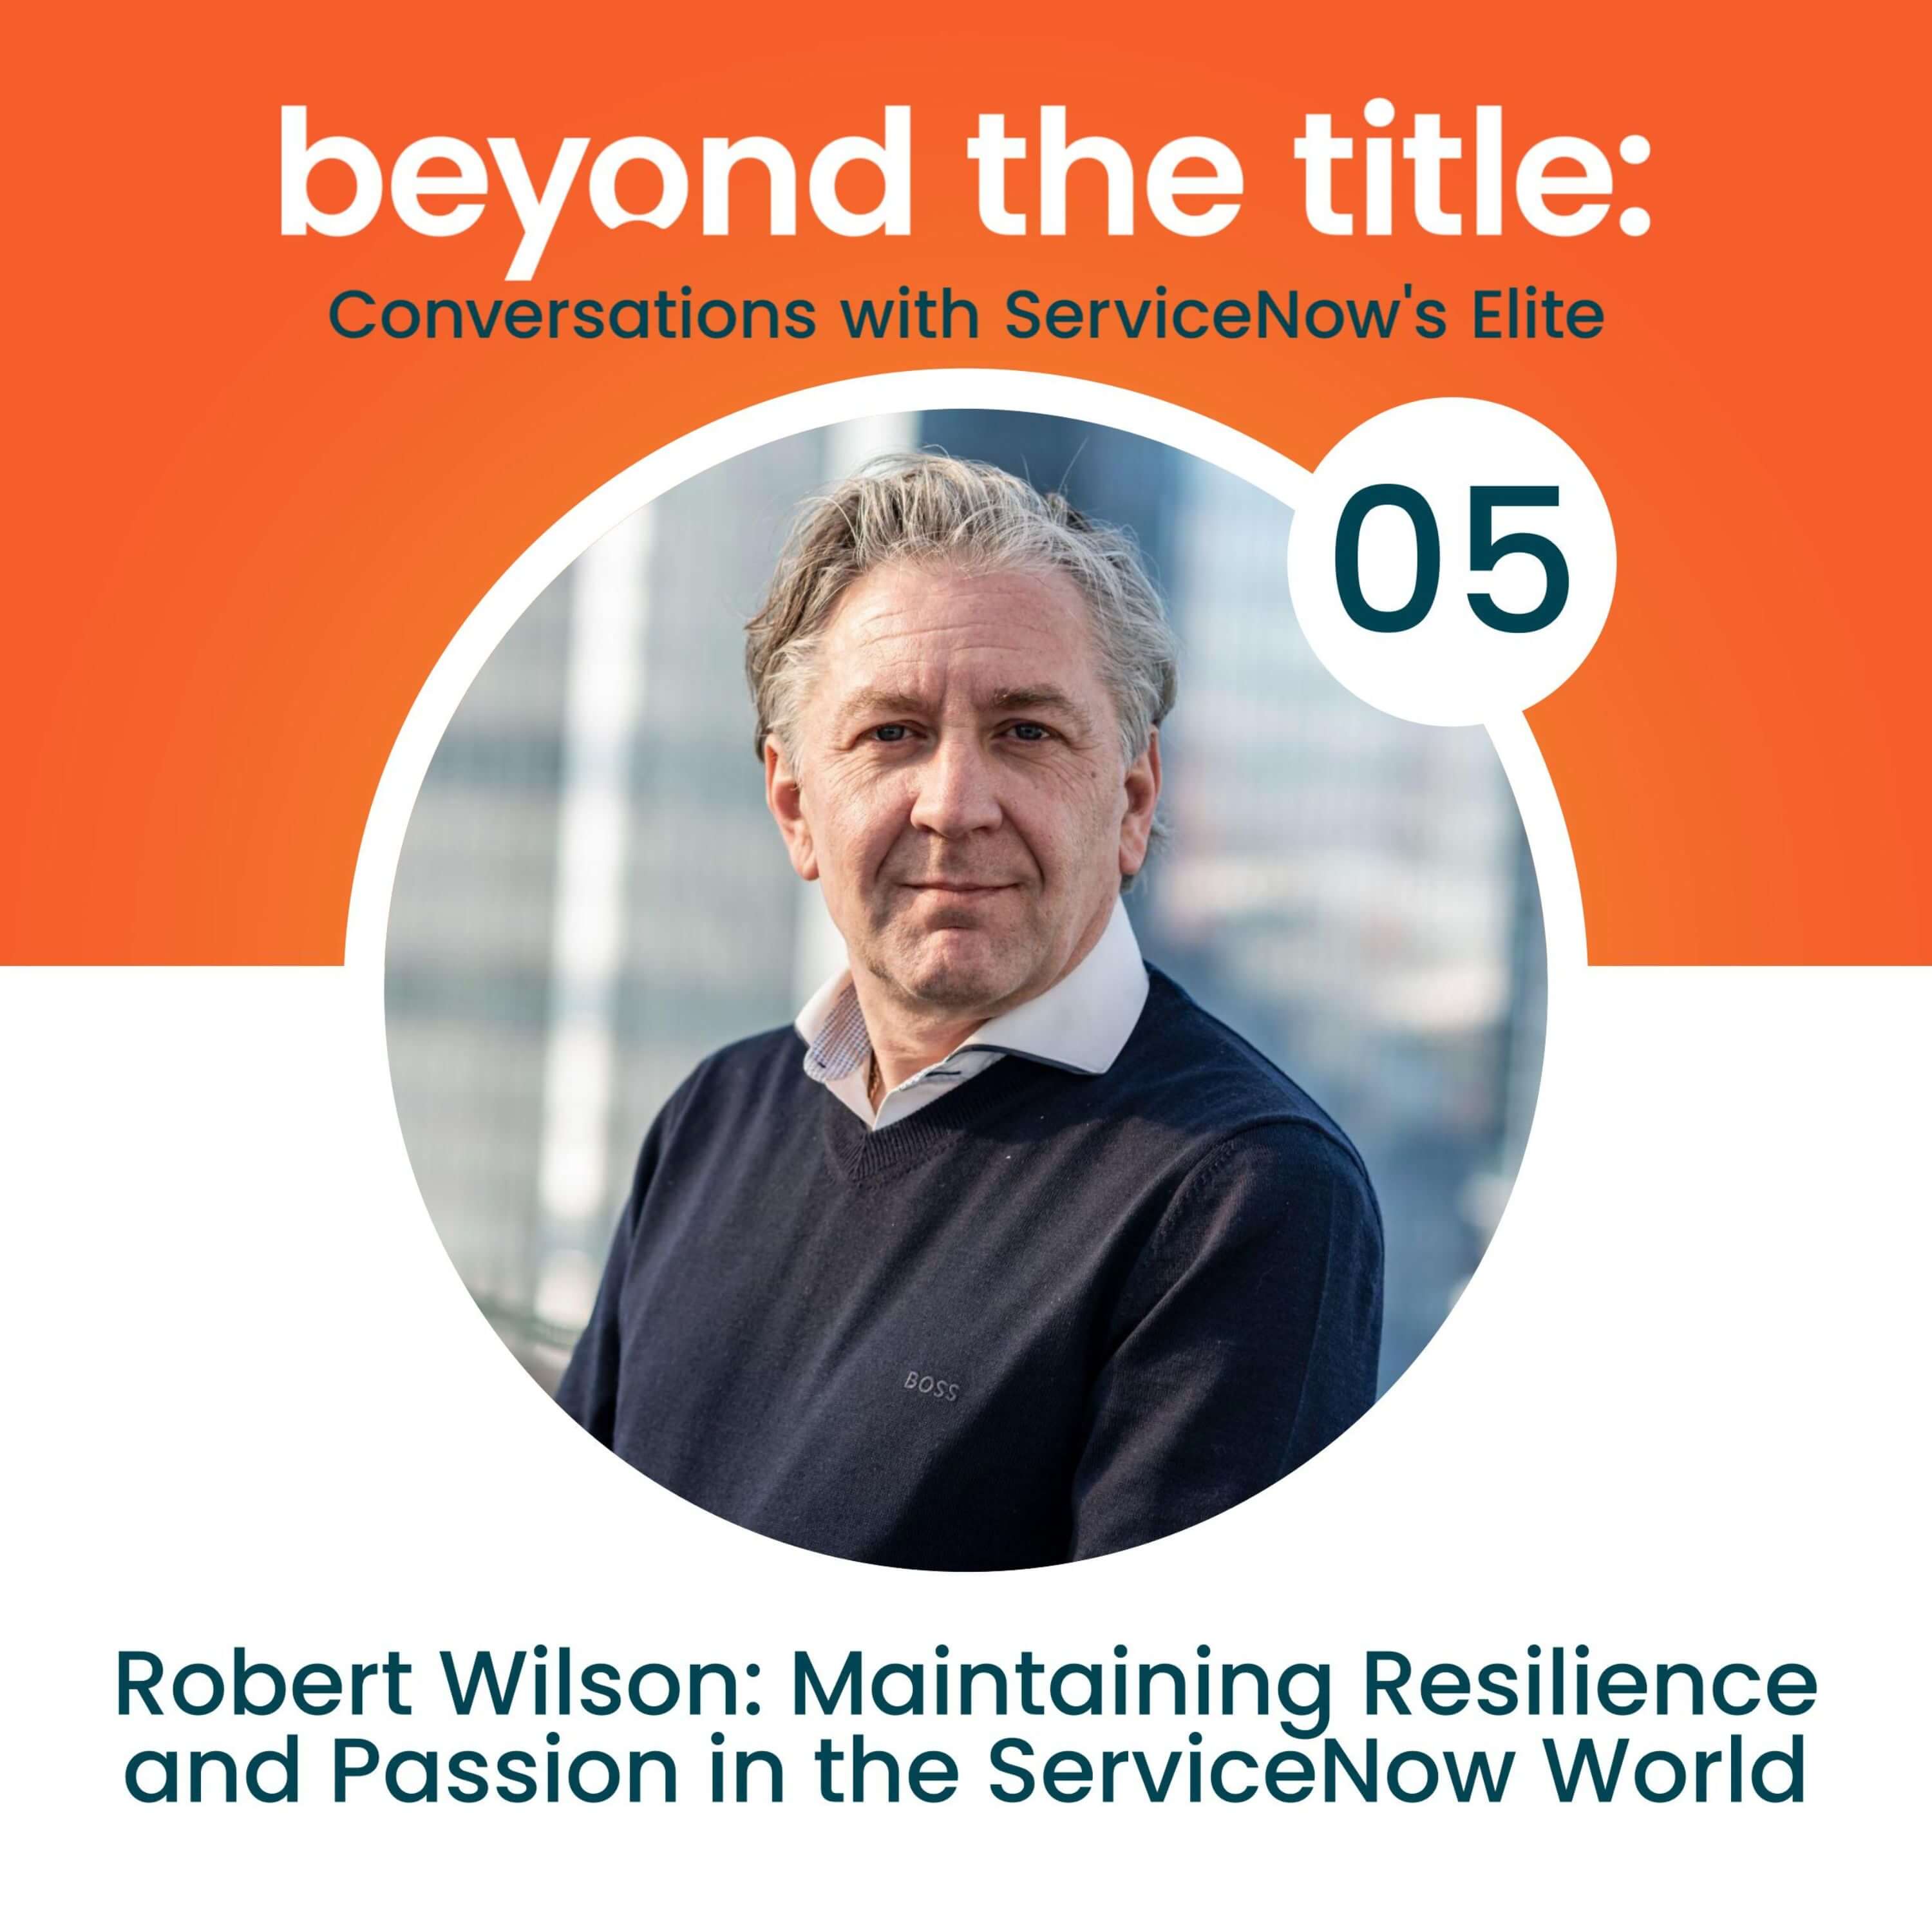 Balancing Act: Maintaining Resilience and Passion in the ServiceNow World with Robert Wilson